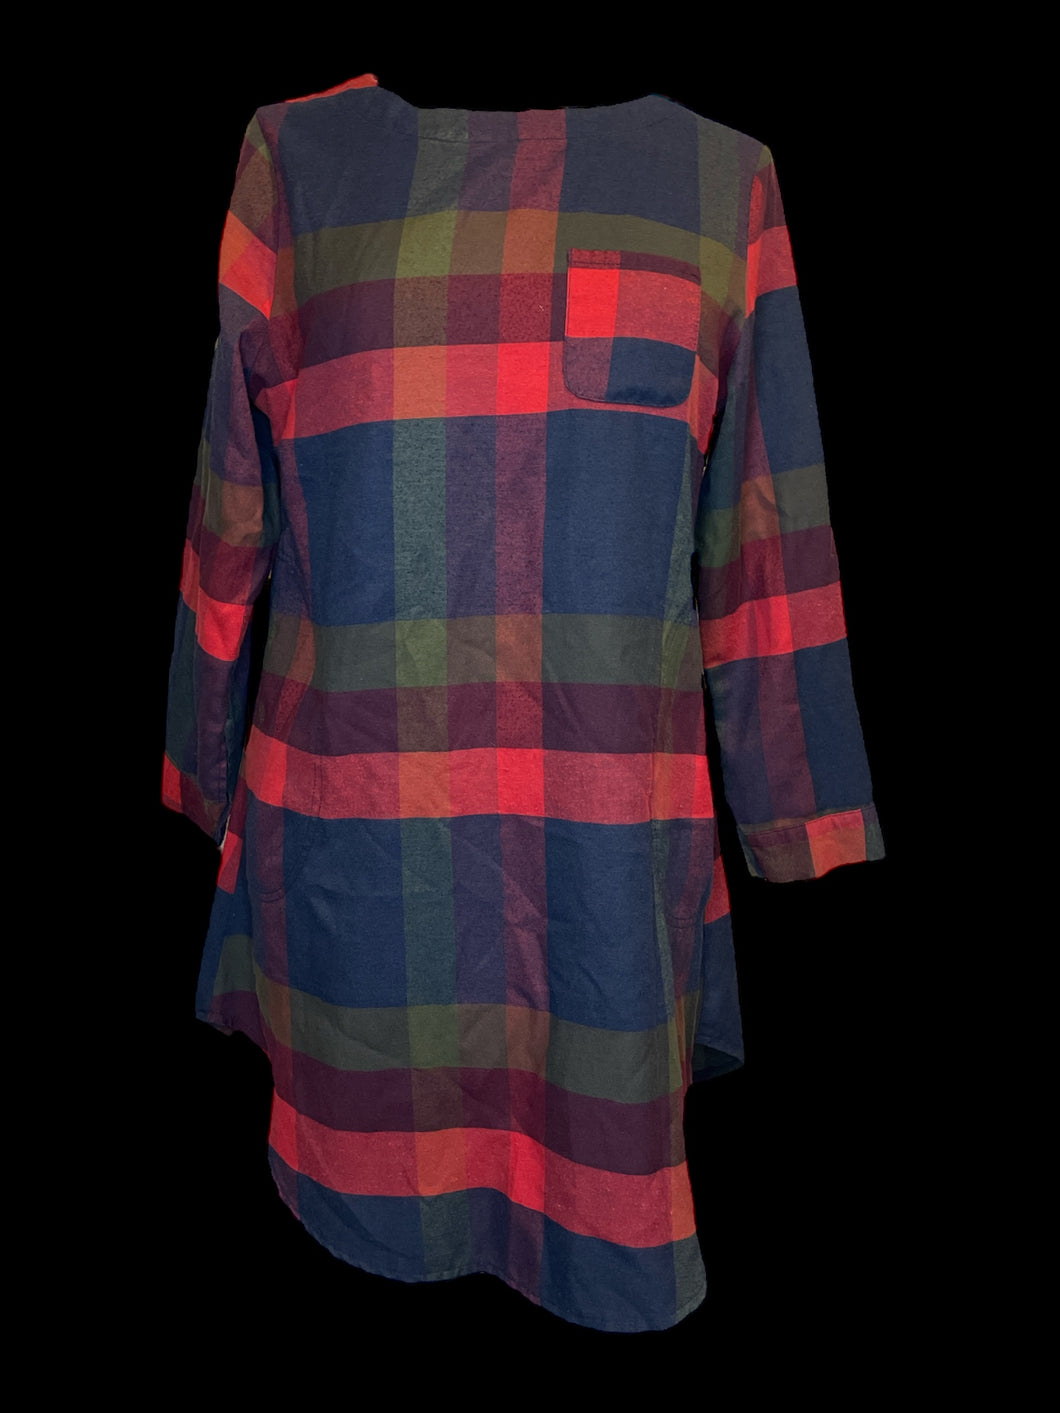 L Red, blue, & green gingham long sleeve scoop neck tunic length top w/ tab button cuffs, chest pocket, side zipper closure, & pockets